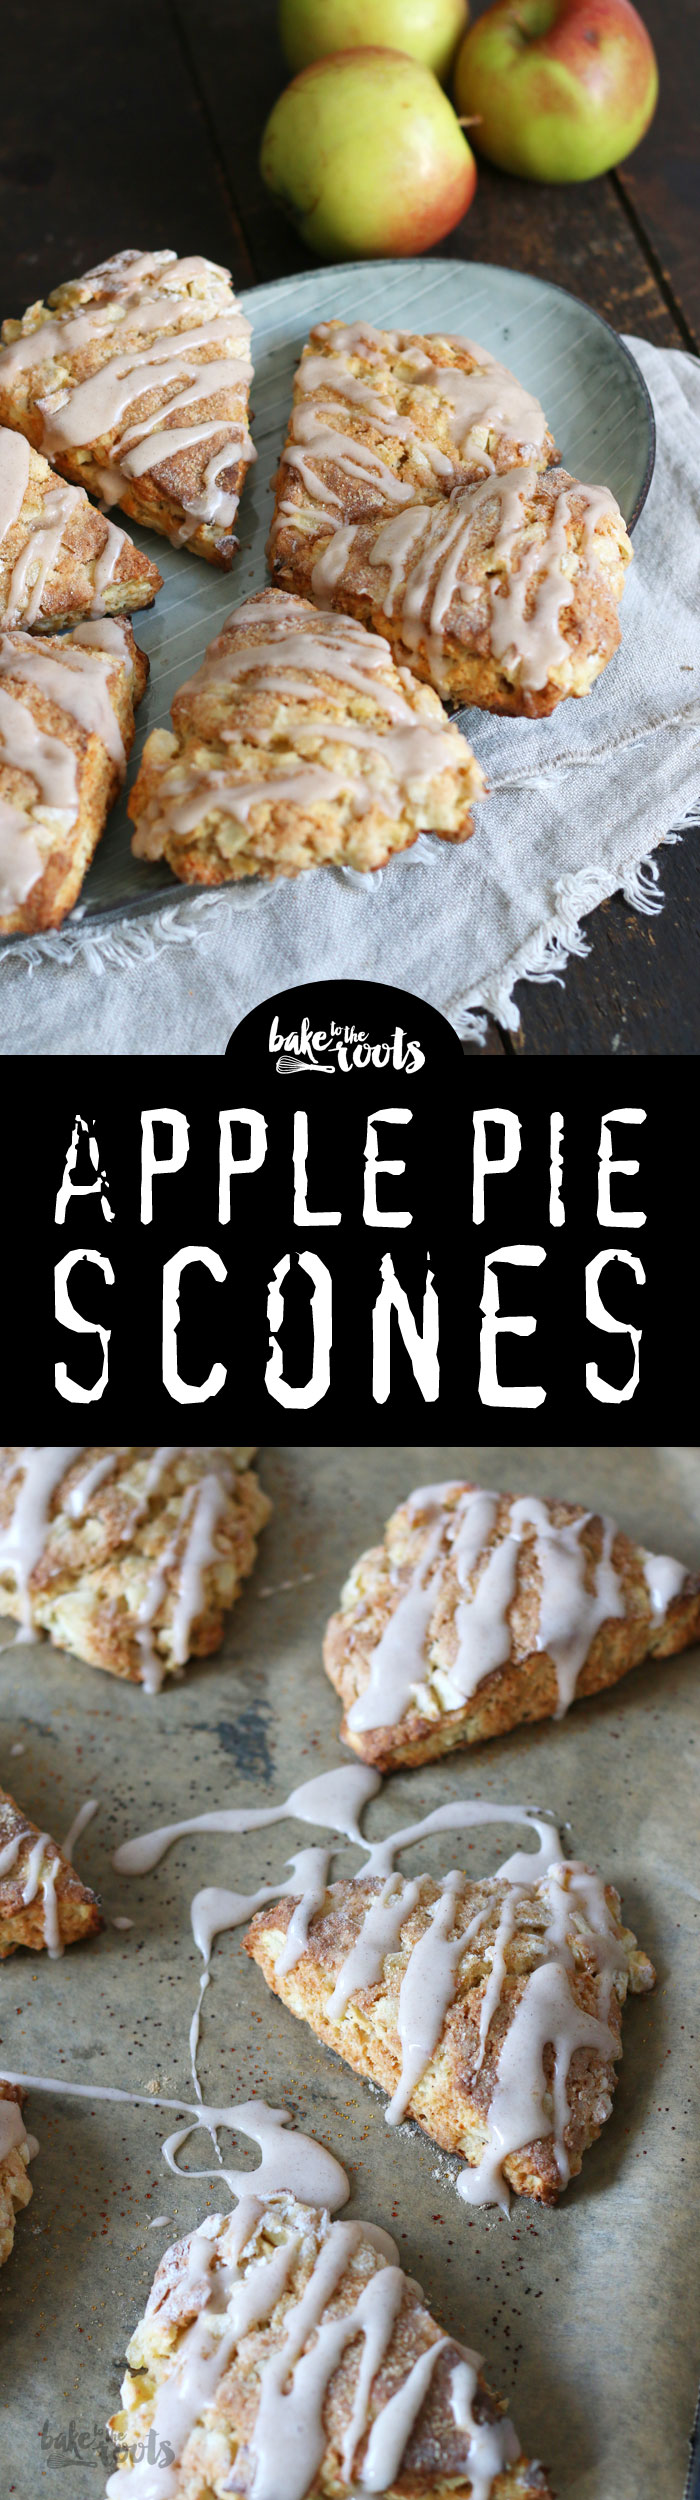 Delicious sweet sack along a cup of coffee or tea: Apple Pie Scones | Bake to the roots